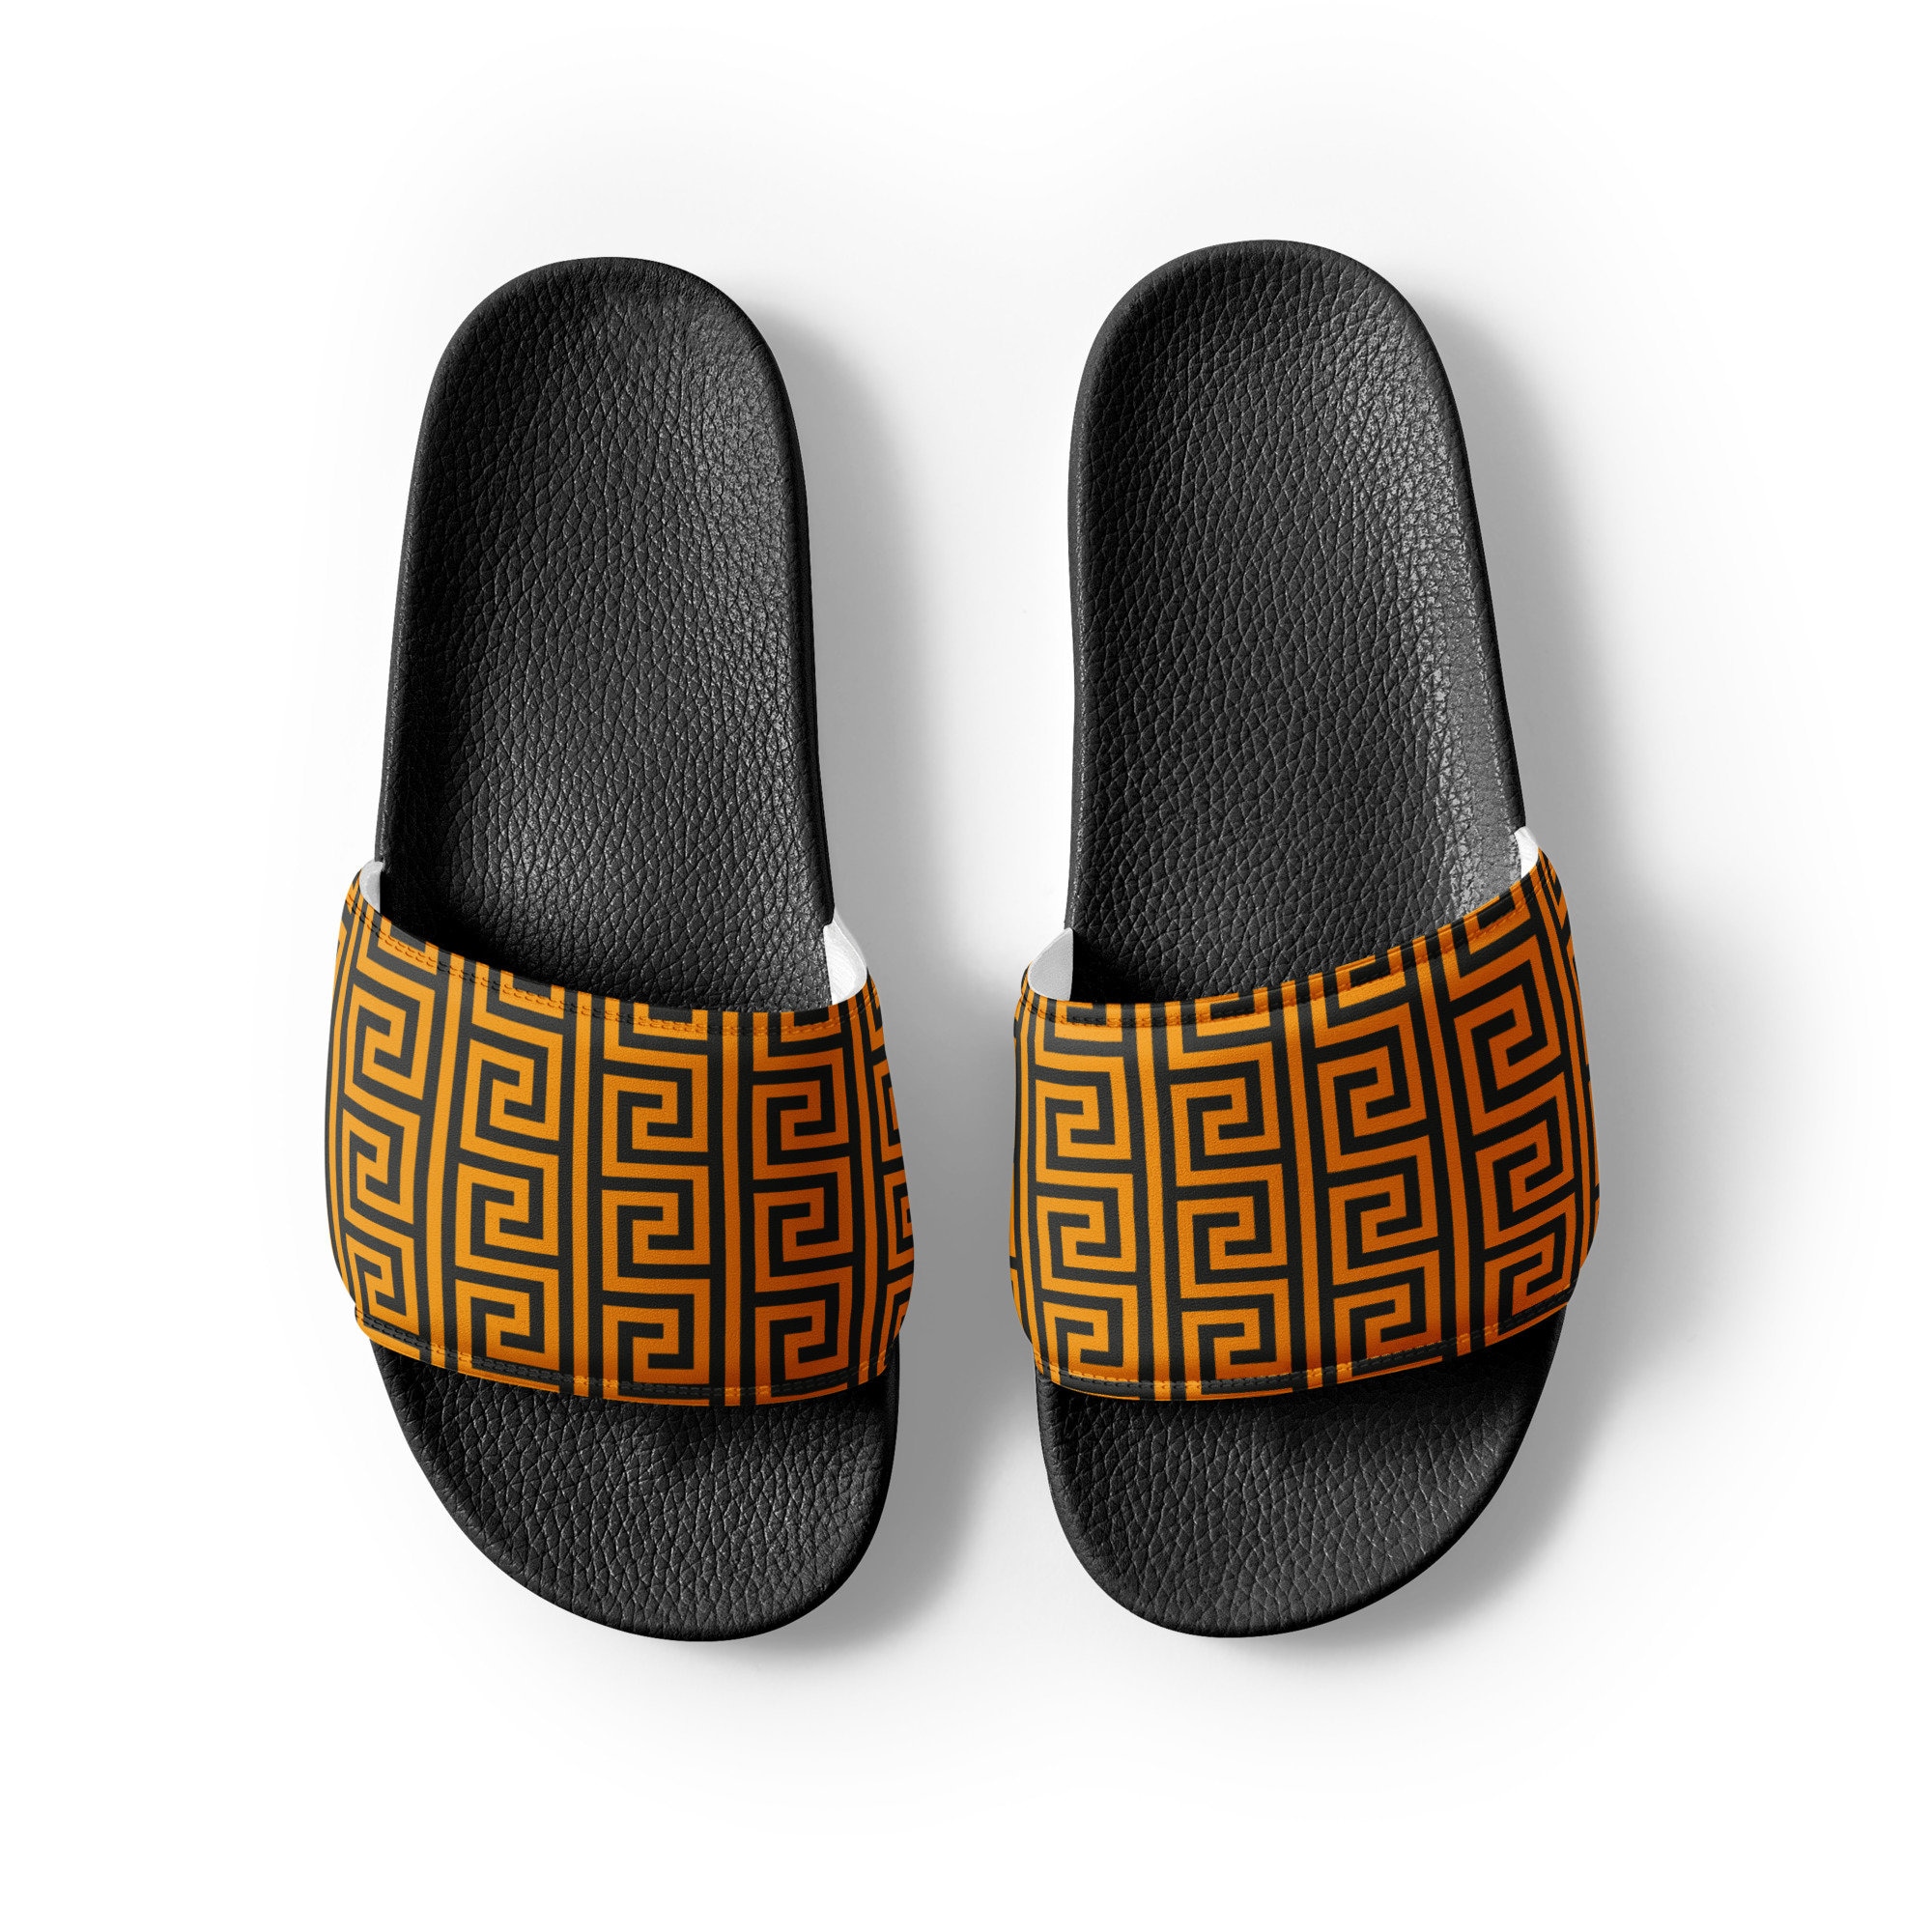 Italian Luxe Print Slides, Stylish Faux Leather Italian Luxe Slides, Handcrafted Italian Luxe Print, Sustainable Products, Gift for Him